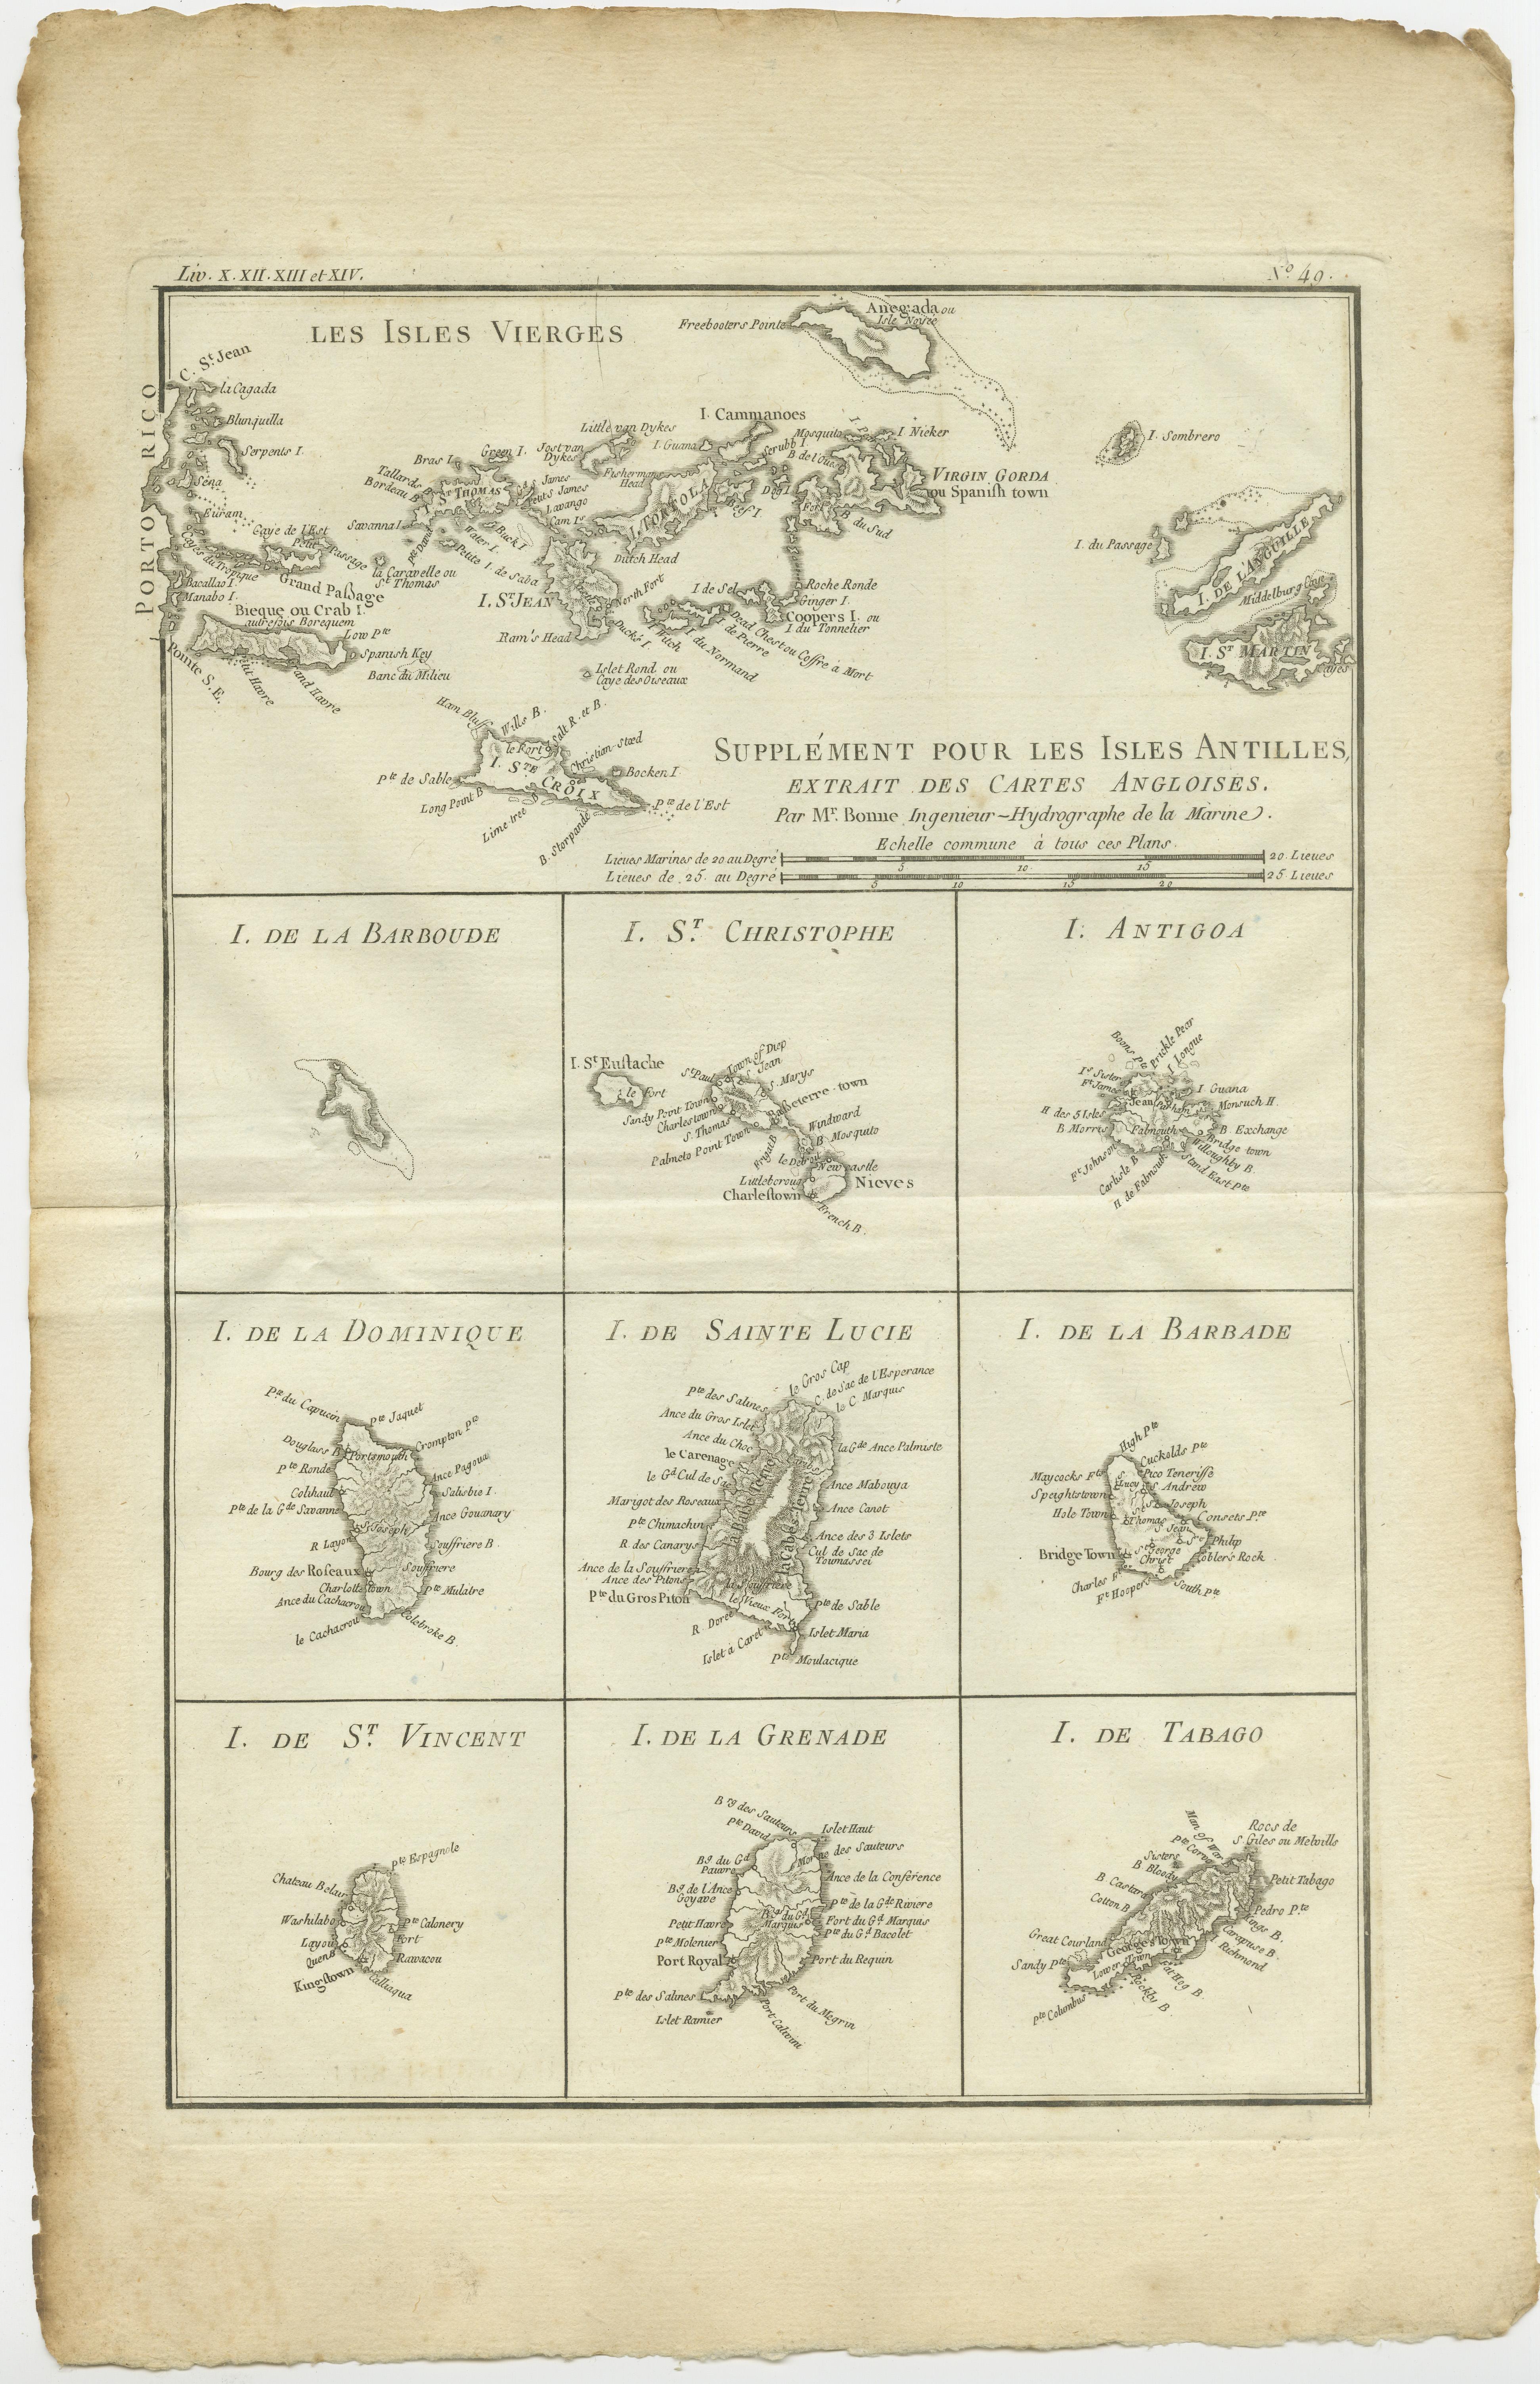 Antique map titled 'Supplément pour les Isles Antilles (..)'. Original old map of the Virgin Islands, with insets of Barbuda, St. Kits, Antigua, Dominica, St. Lucia, Barbados, St. Vincent, Grenada, and Tobago. The main map covers the region from St.